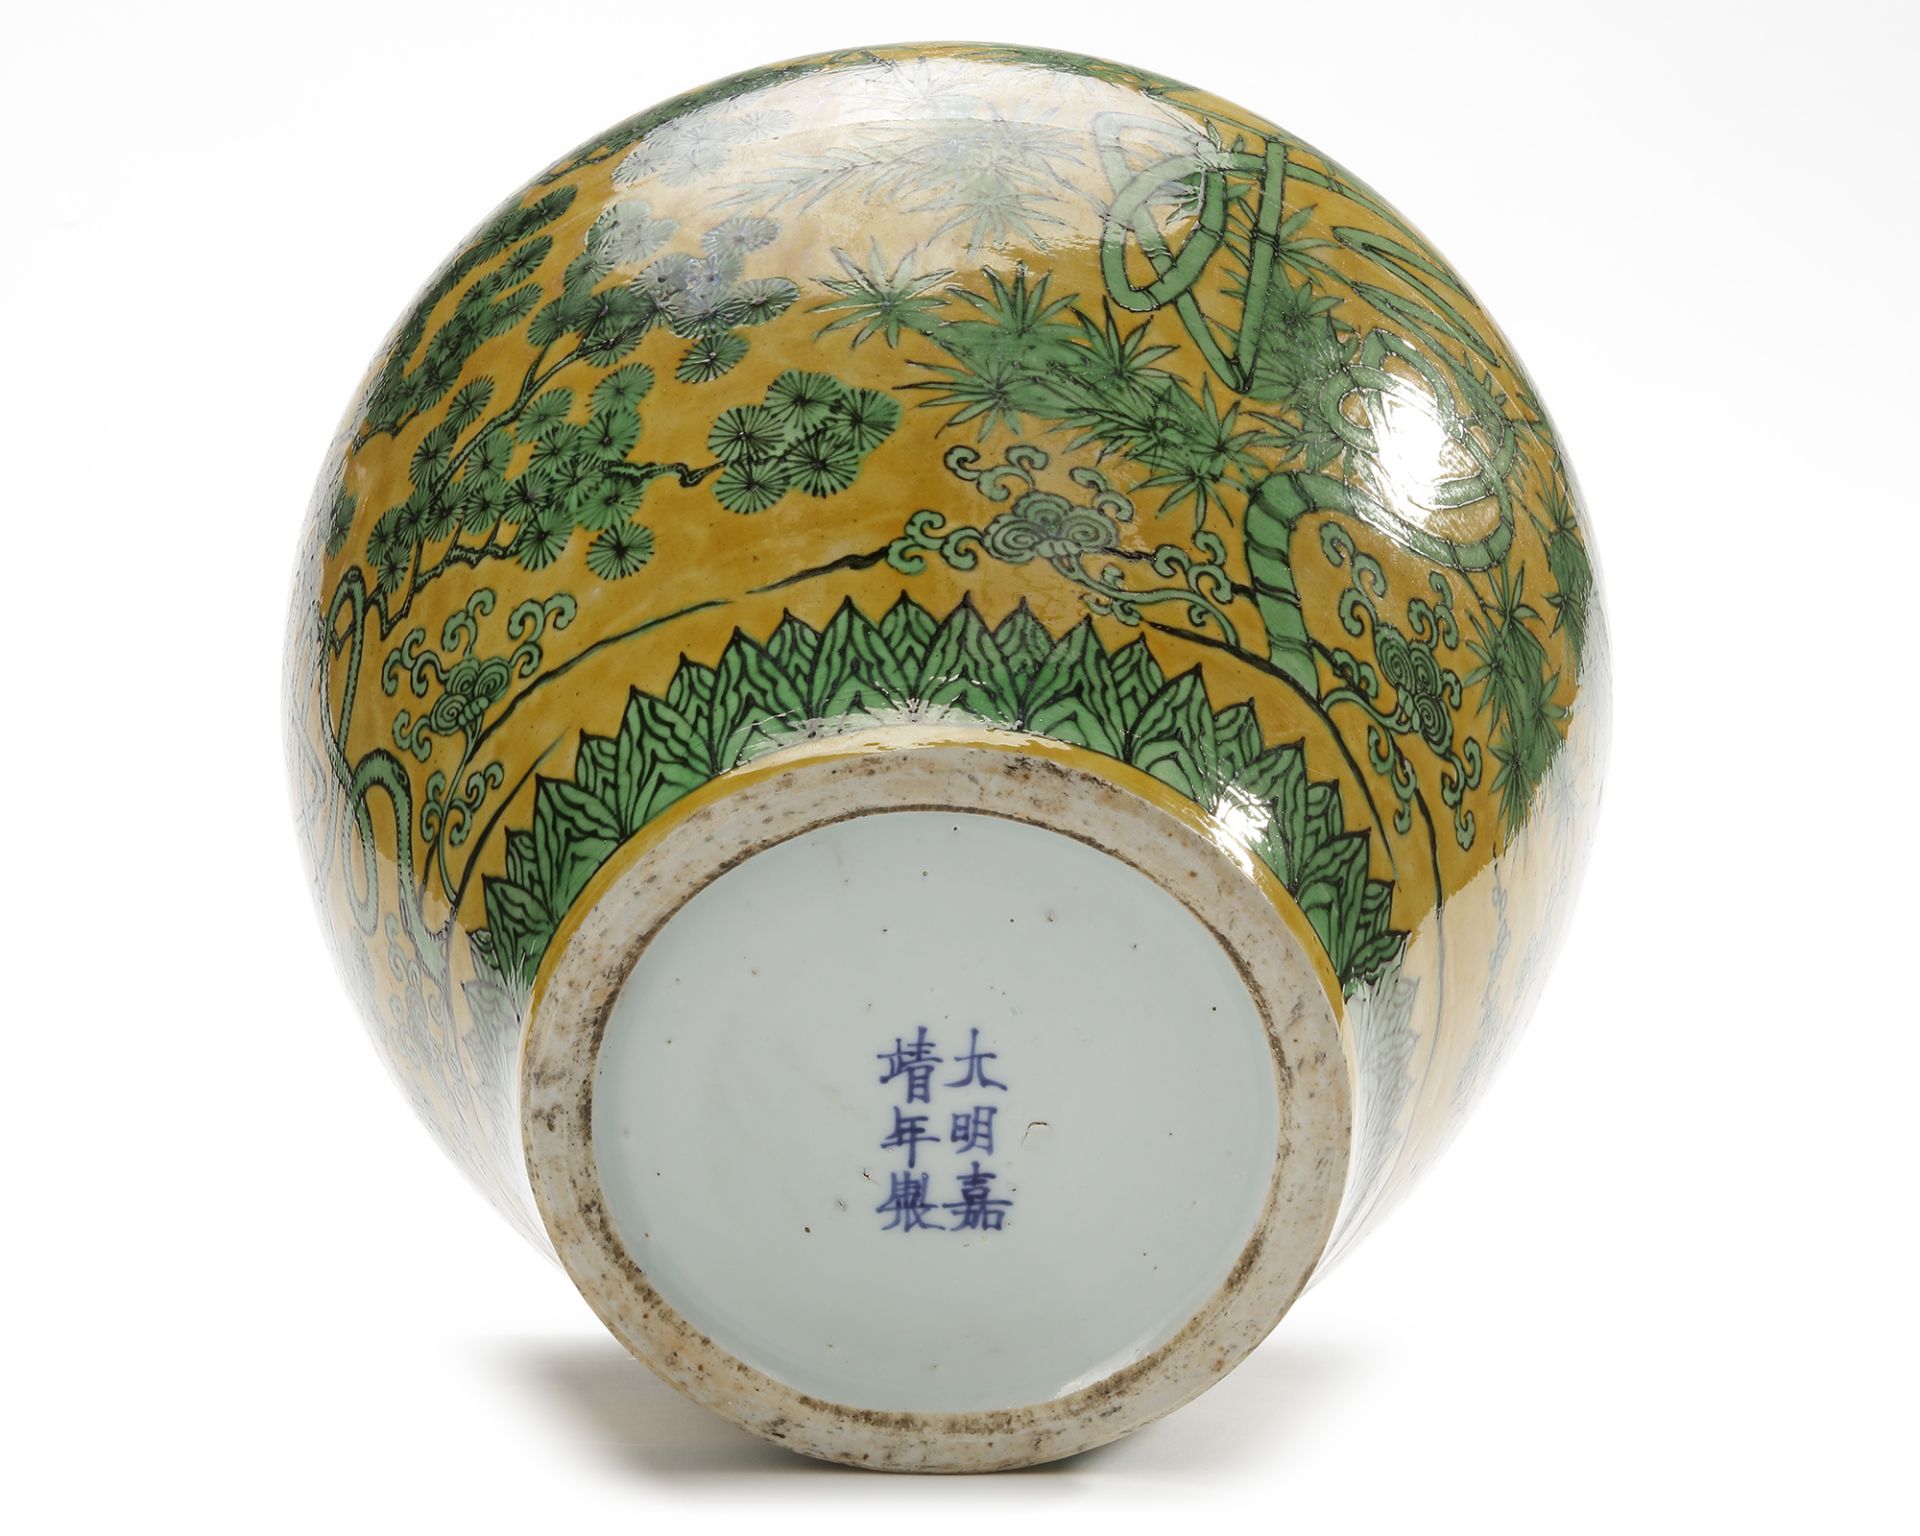 A CHINESE YELLOW-GROUND GREEN ENAMELED JAR, MING DYNASTY (1368-1644) OR LATER - Image 5 of 5